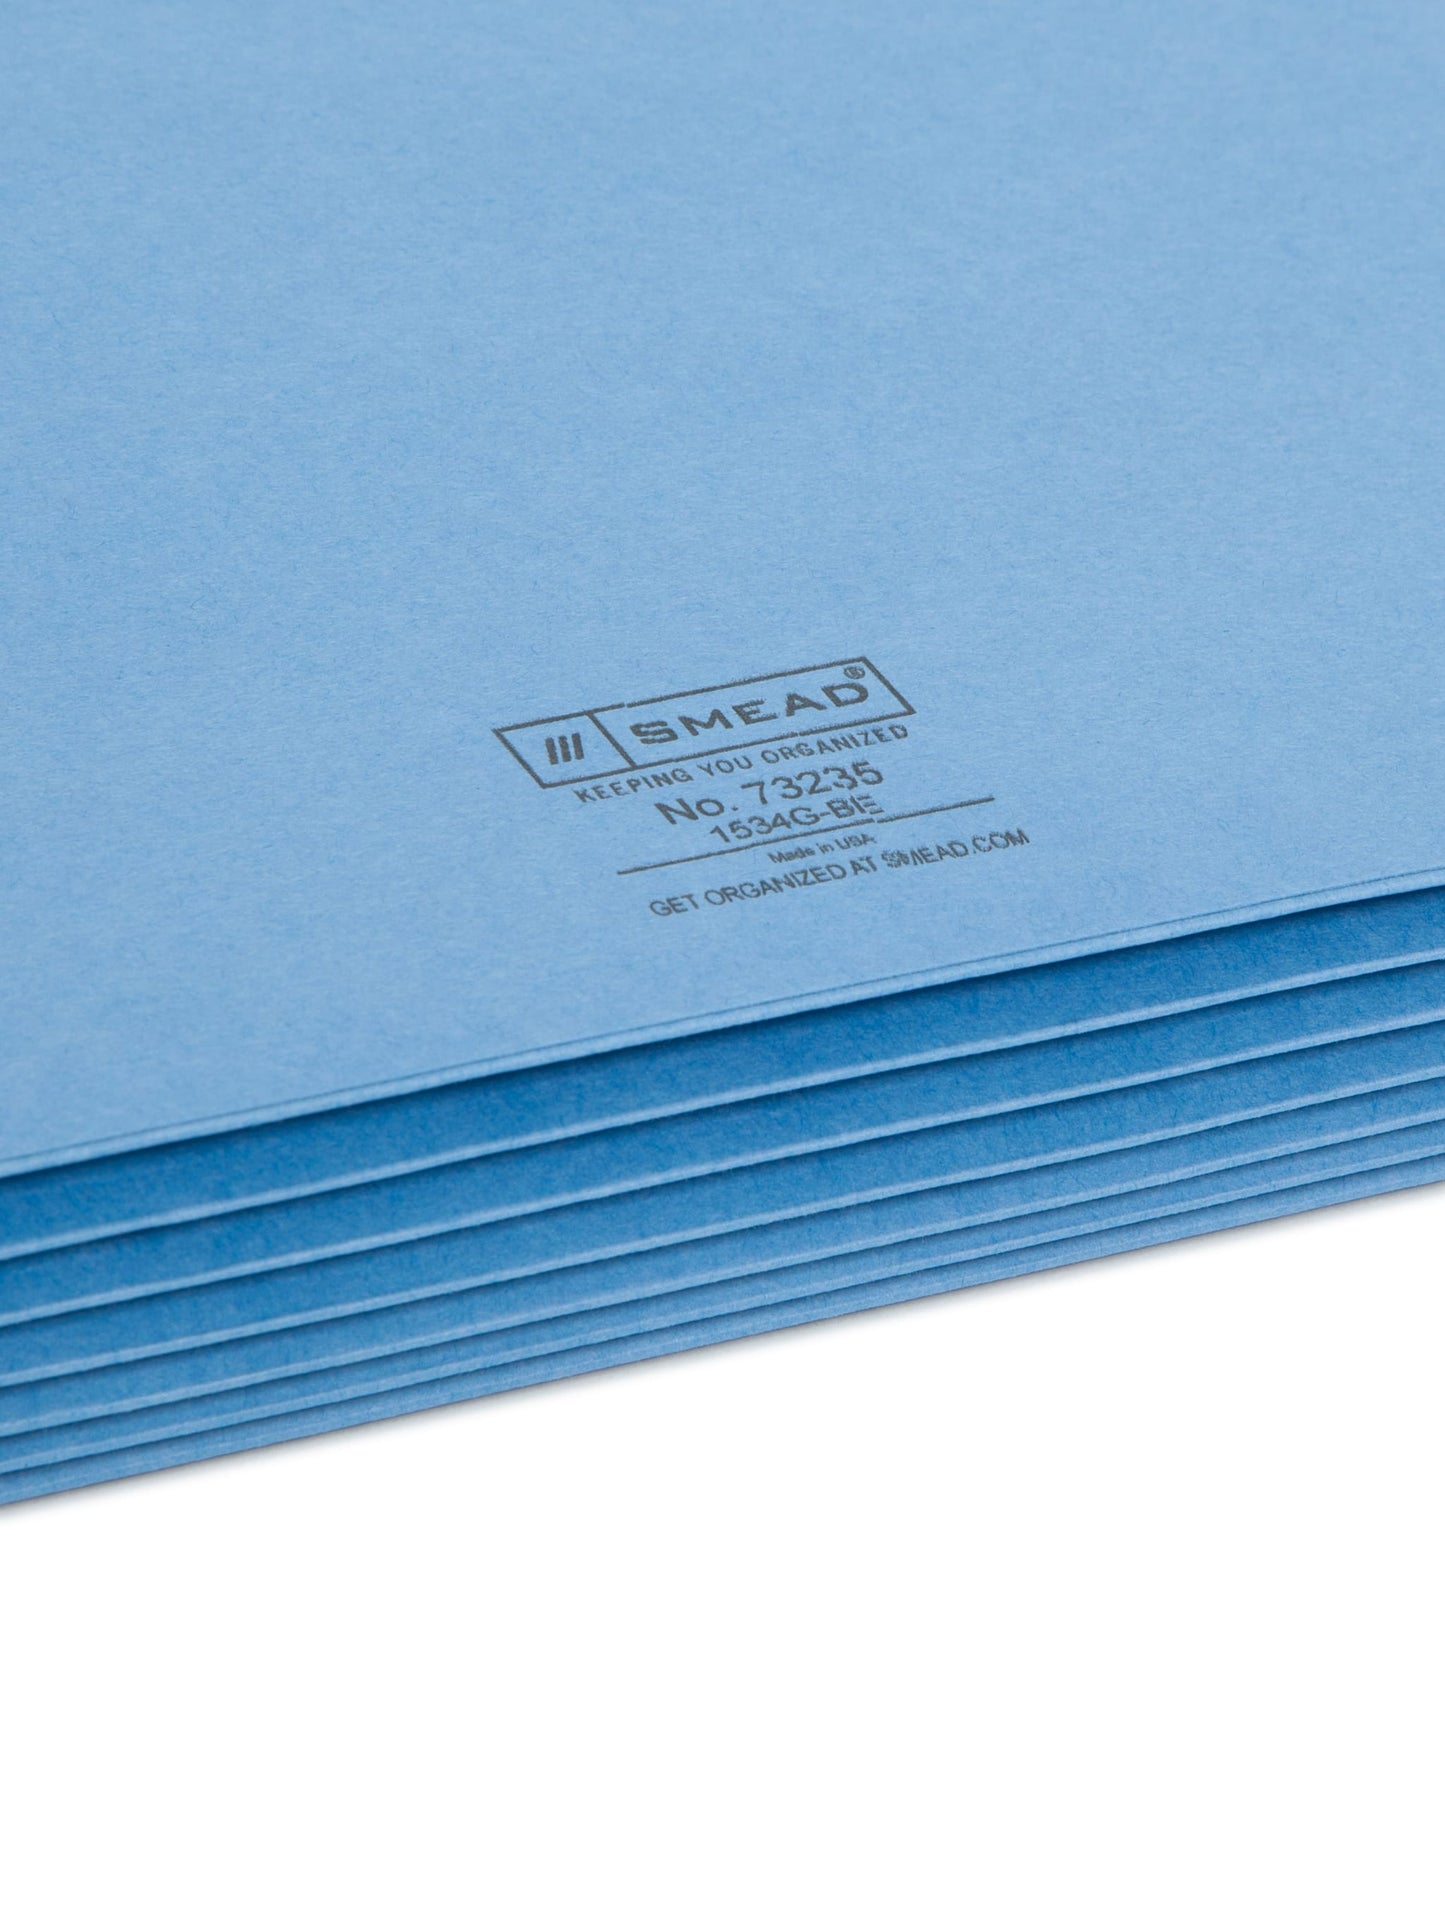 File Pockets, 5-1/4 inch Expansion, Straight-Cut Tab, Blue Color, Letter Size, Set of 0, 30086486732353